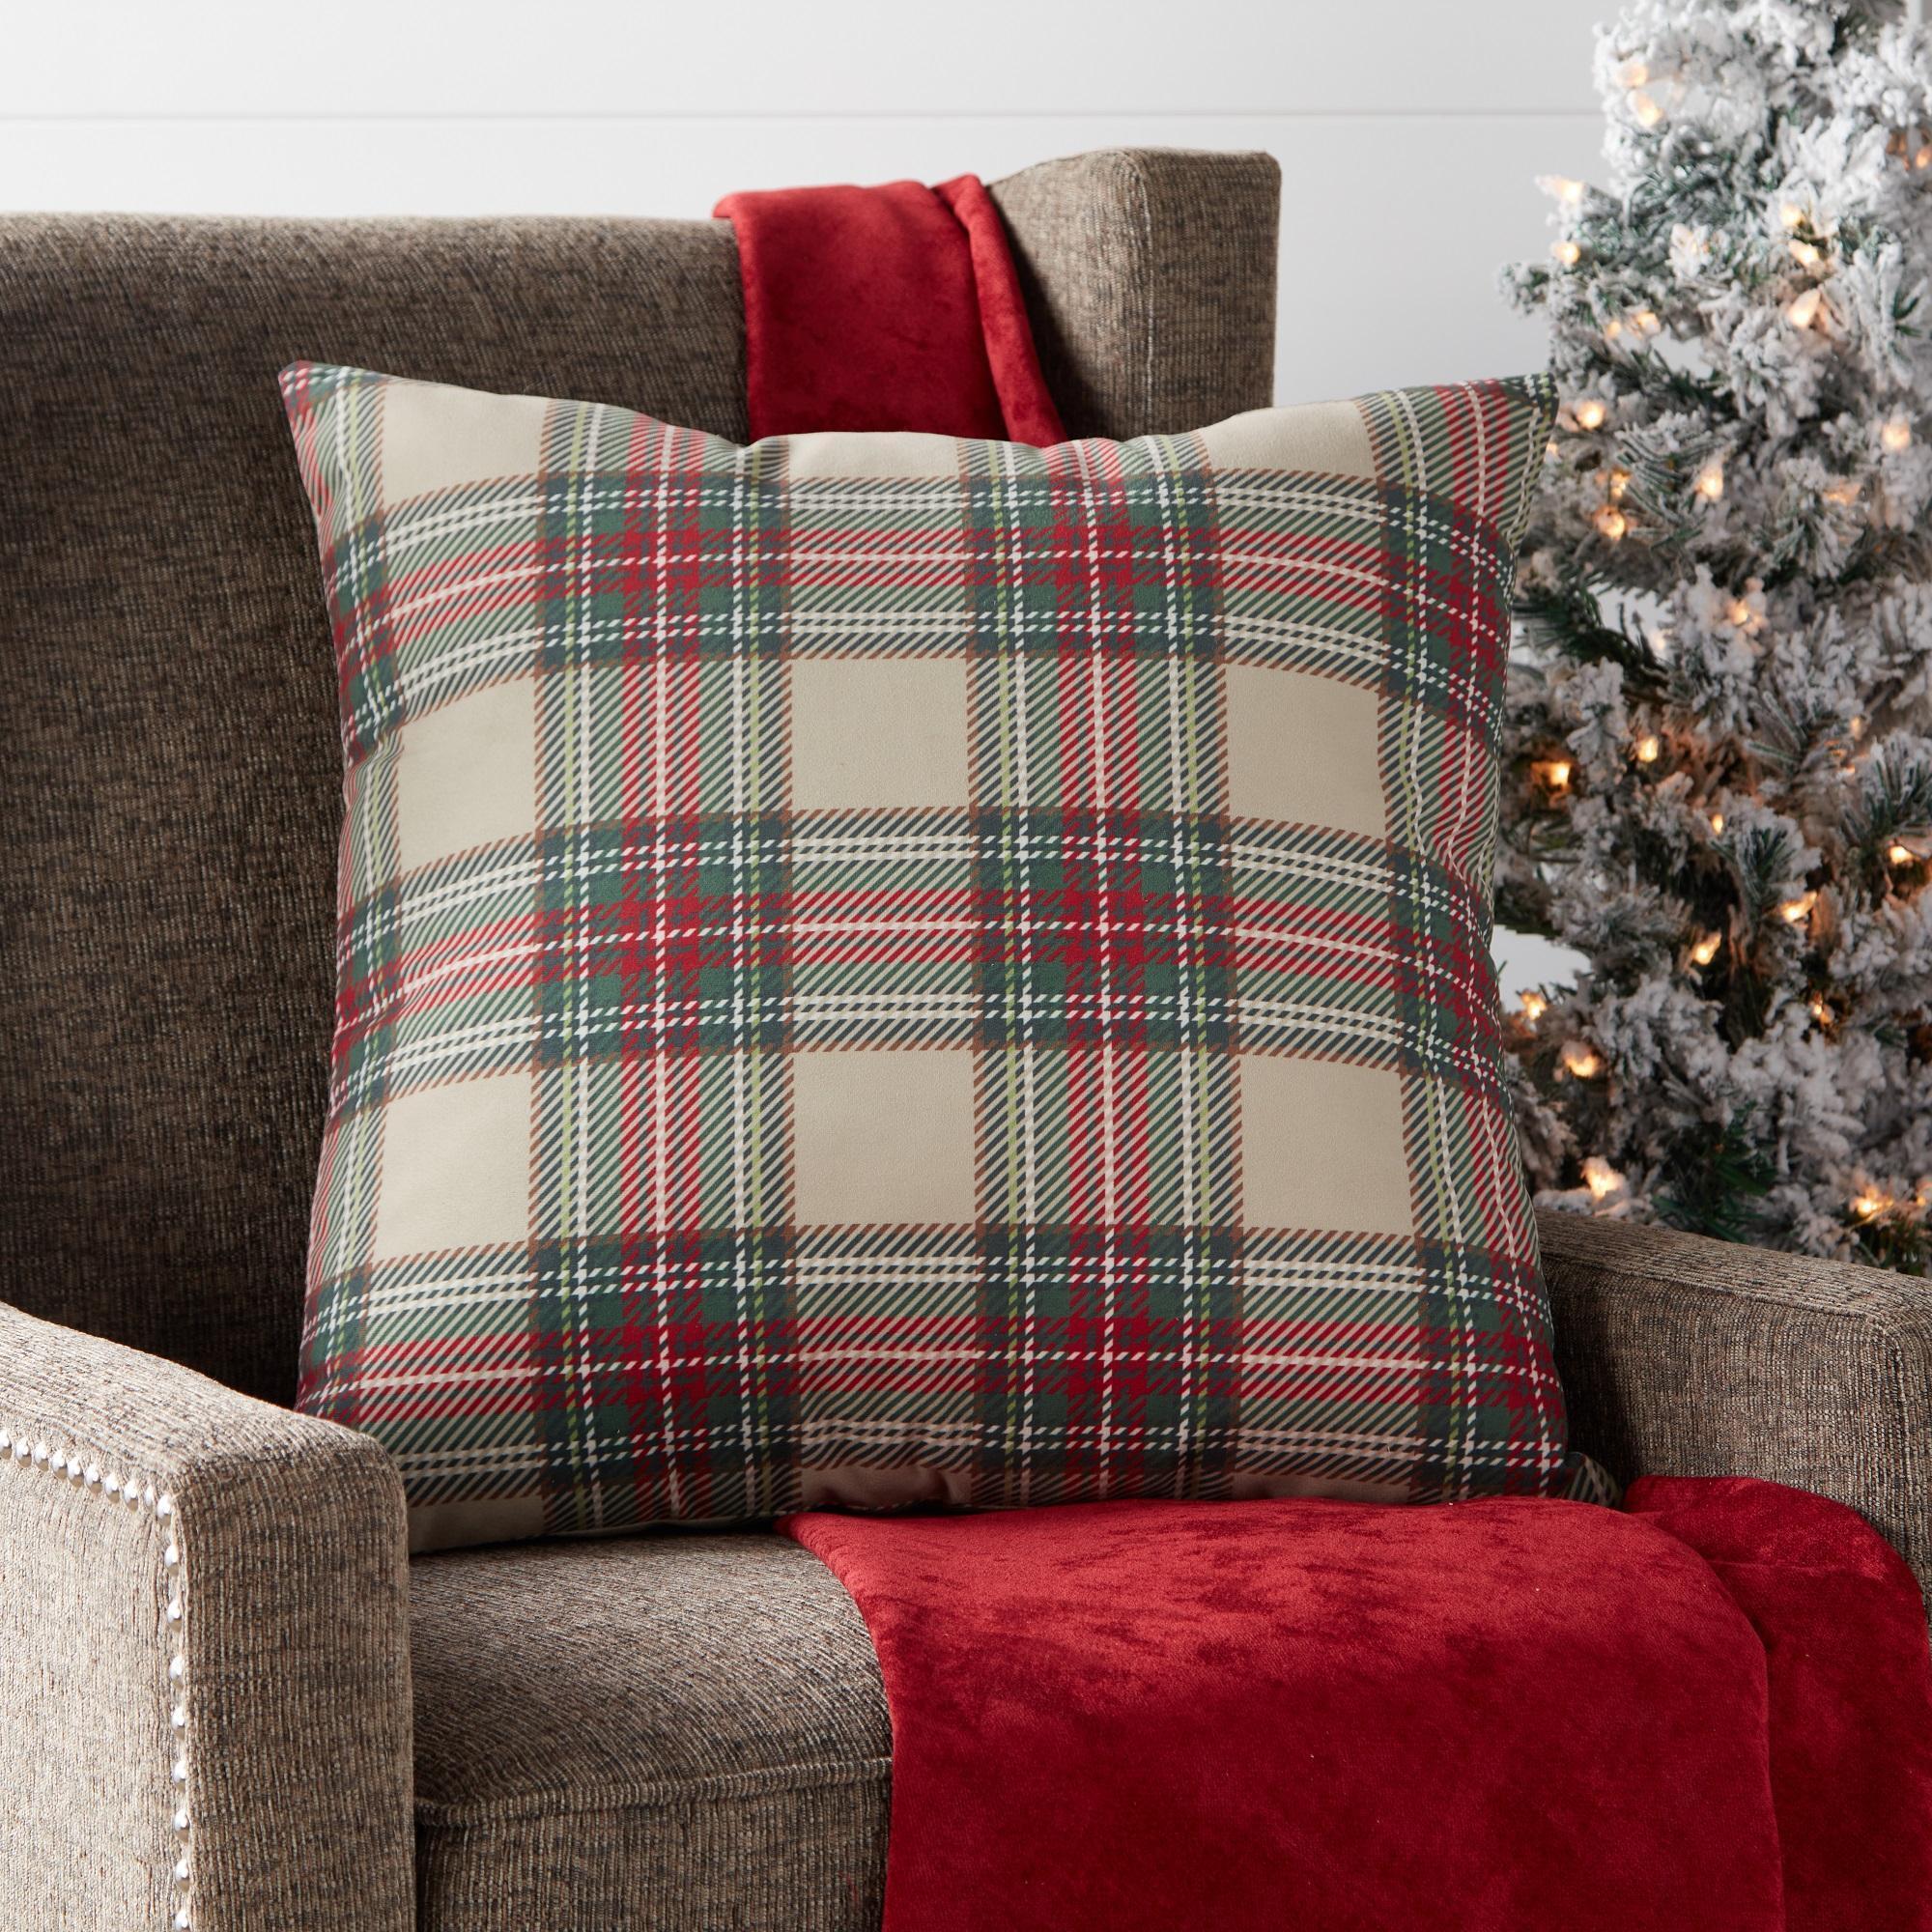 18" Red and White Plaid Christmas Square Throw Pillow alternate image